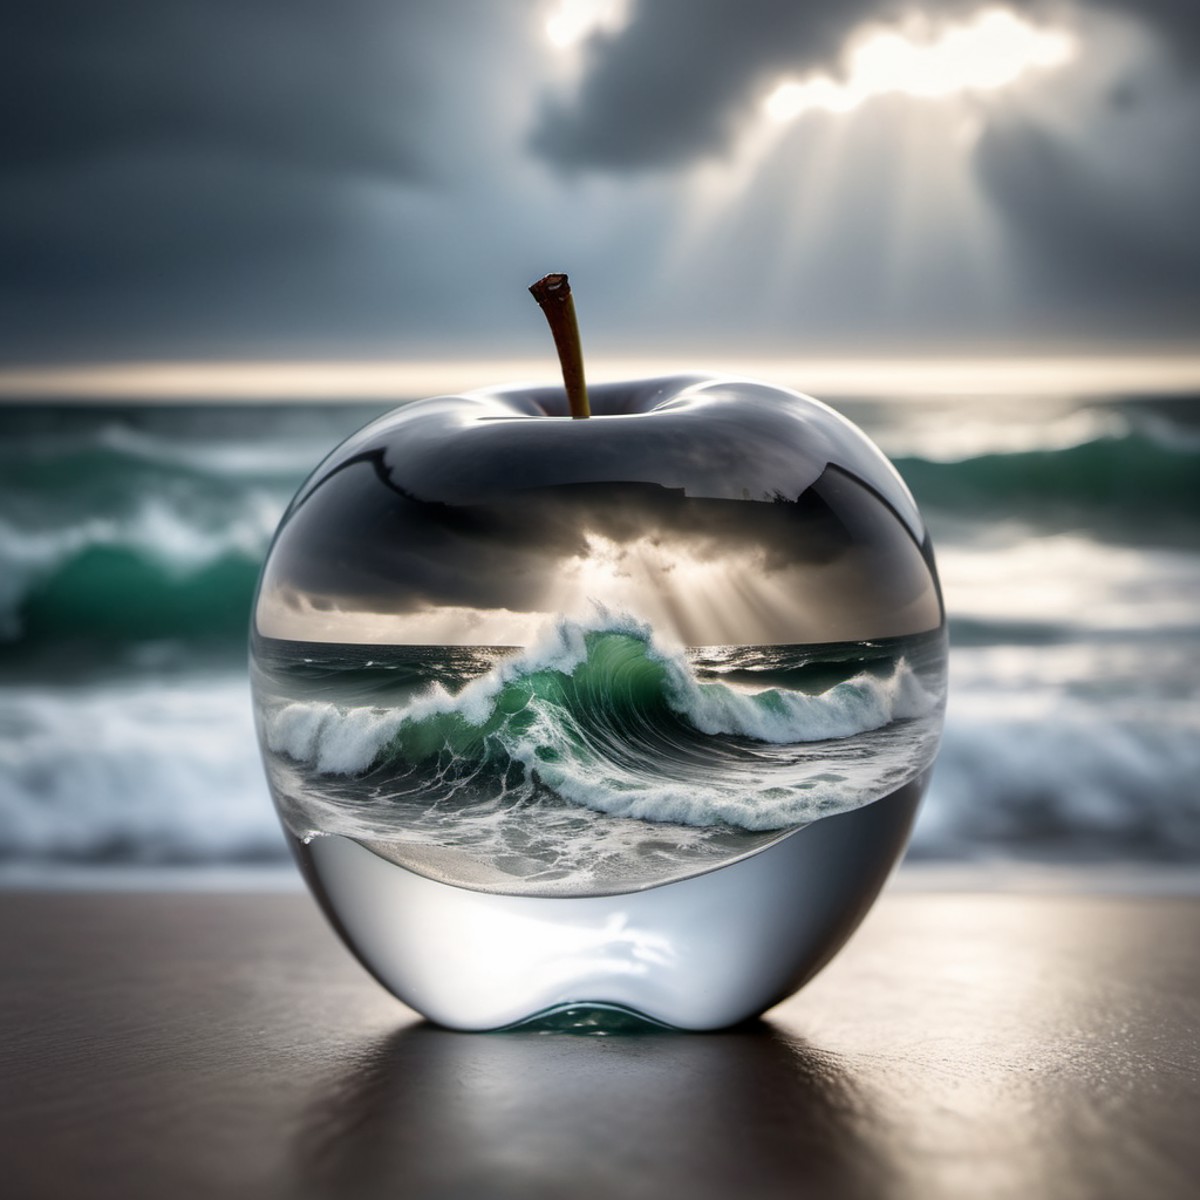 Imagine a photograph capturing an extraordinary and surreal subject: a transparent apple, crystal clear and perfectly form...